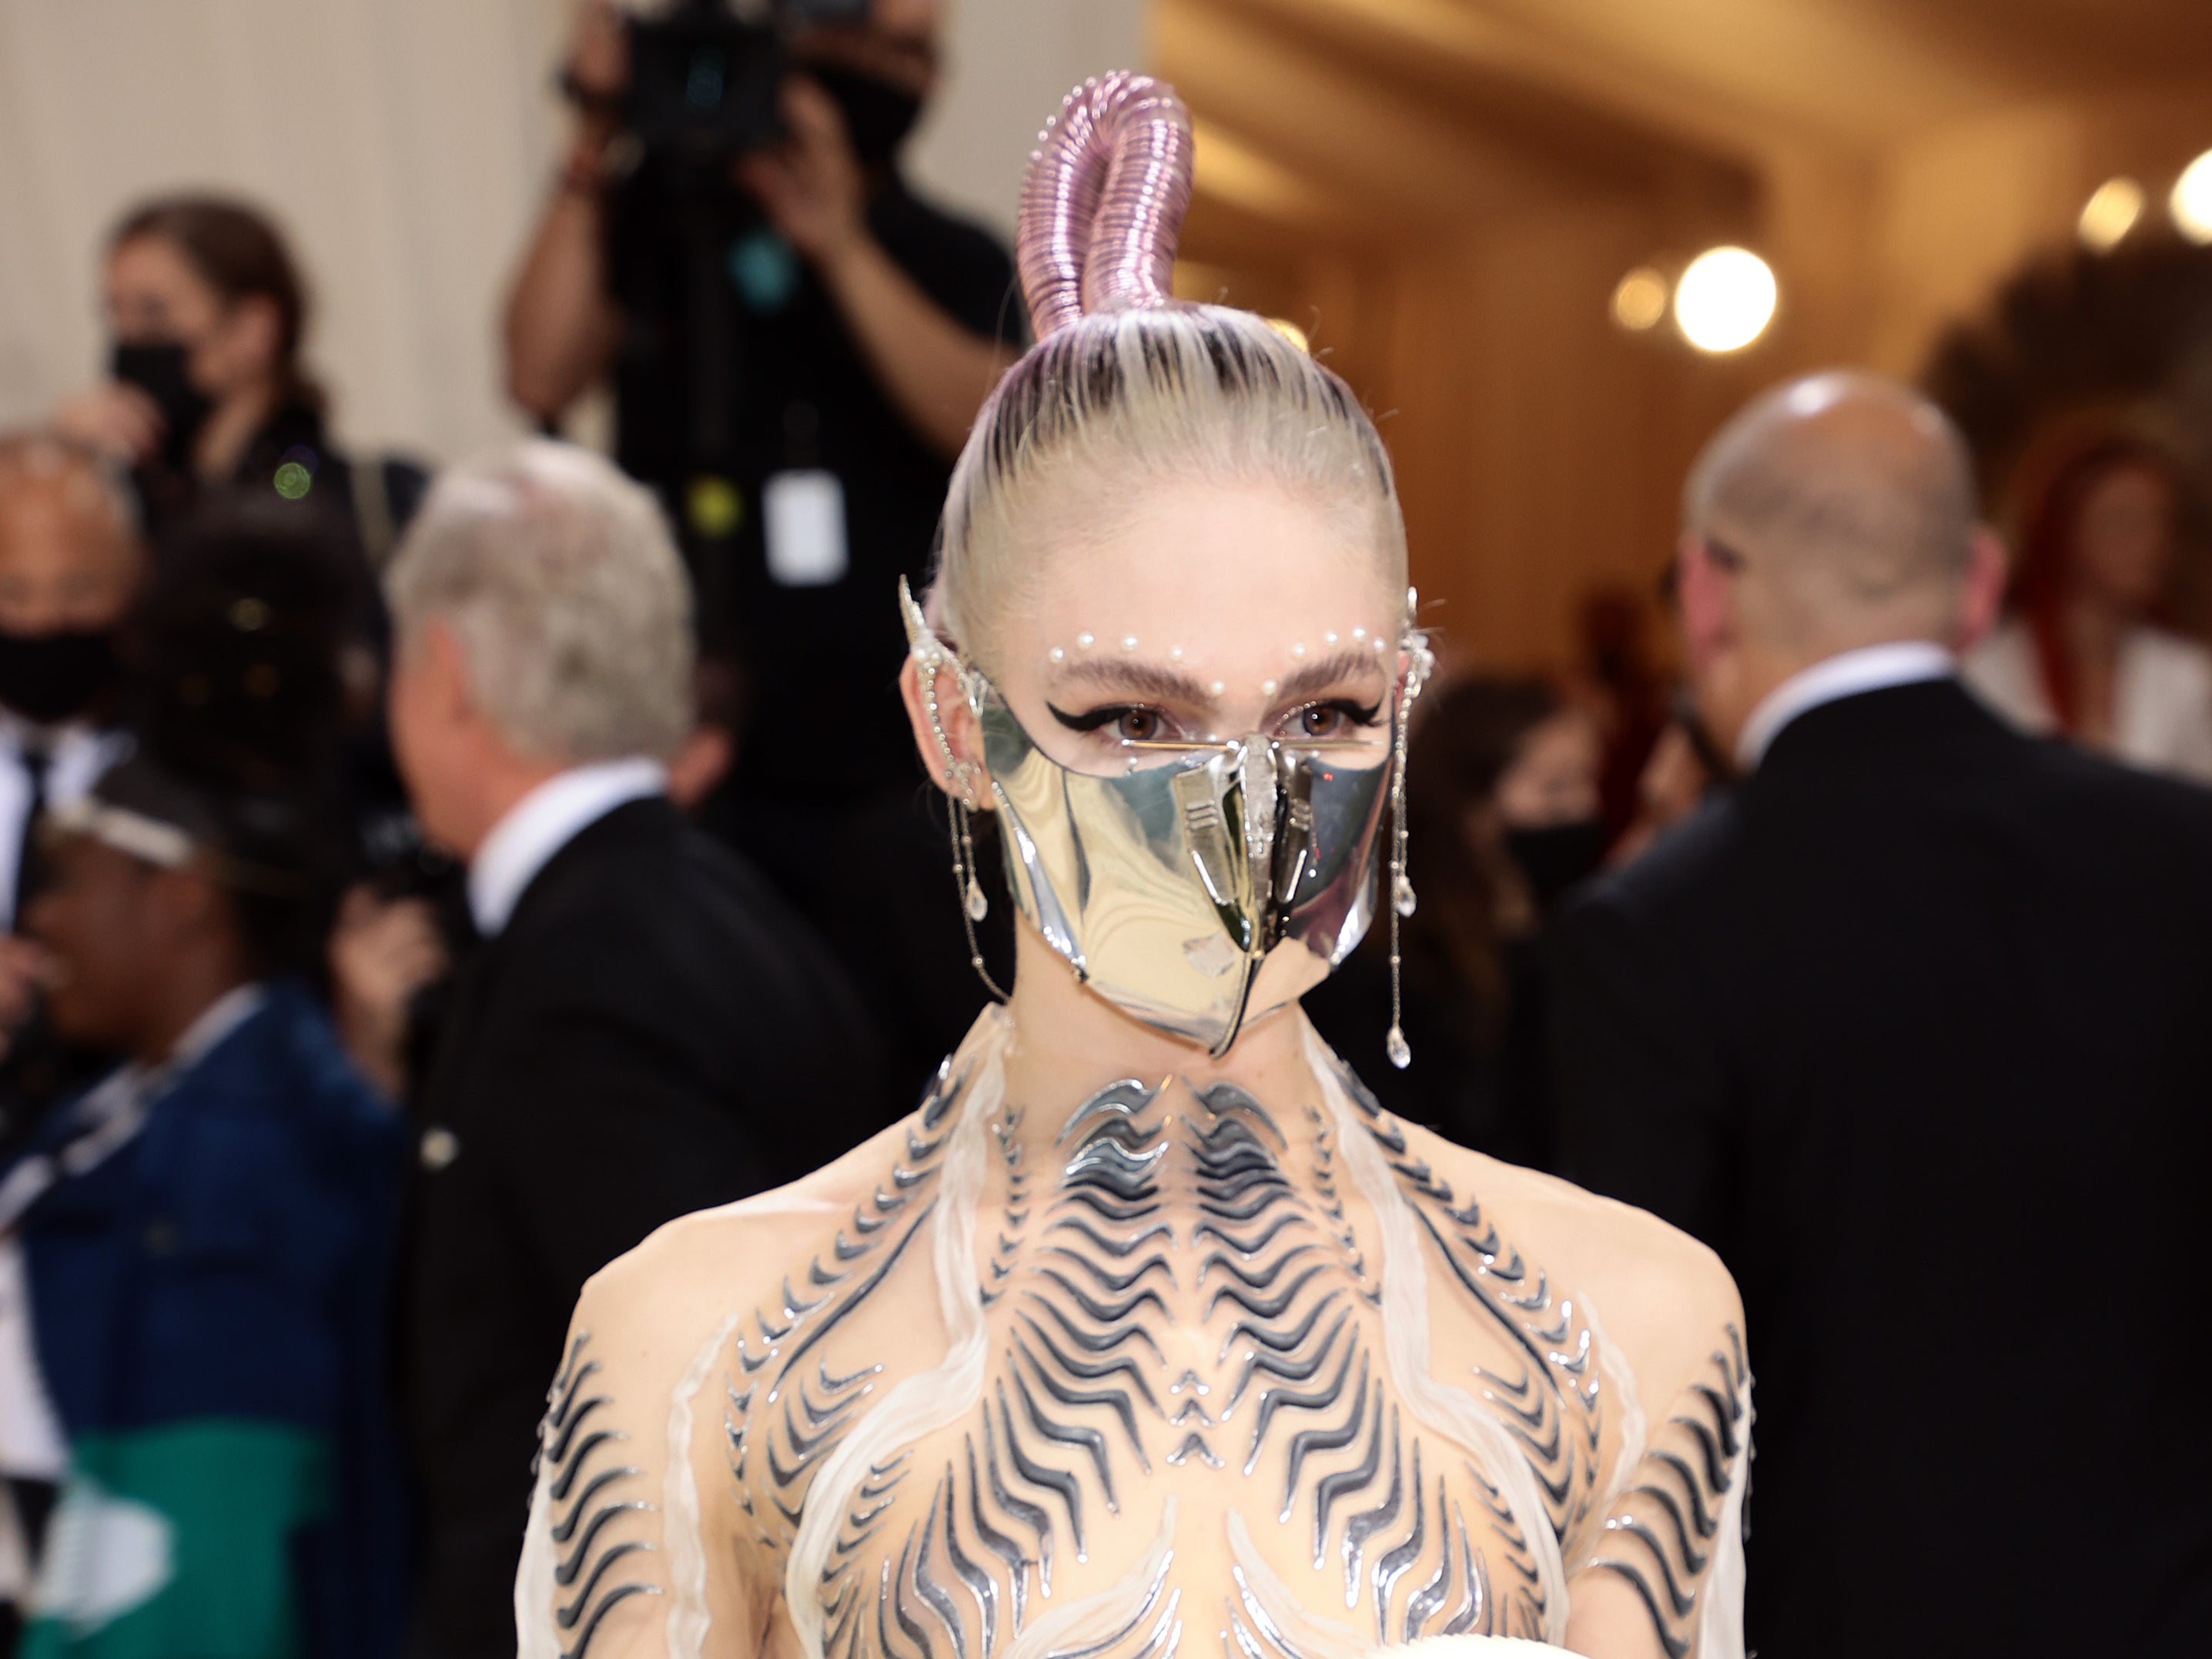 Grimes is selling her Met Gala accessories to raise money for